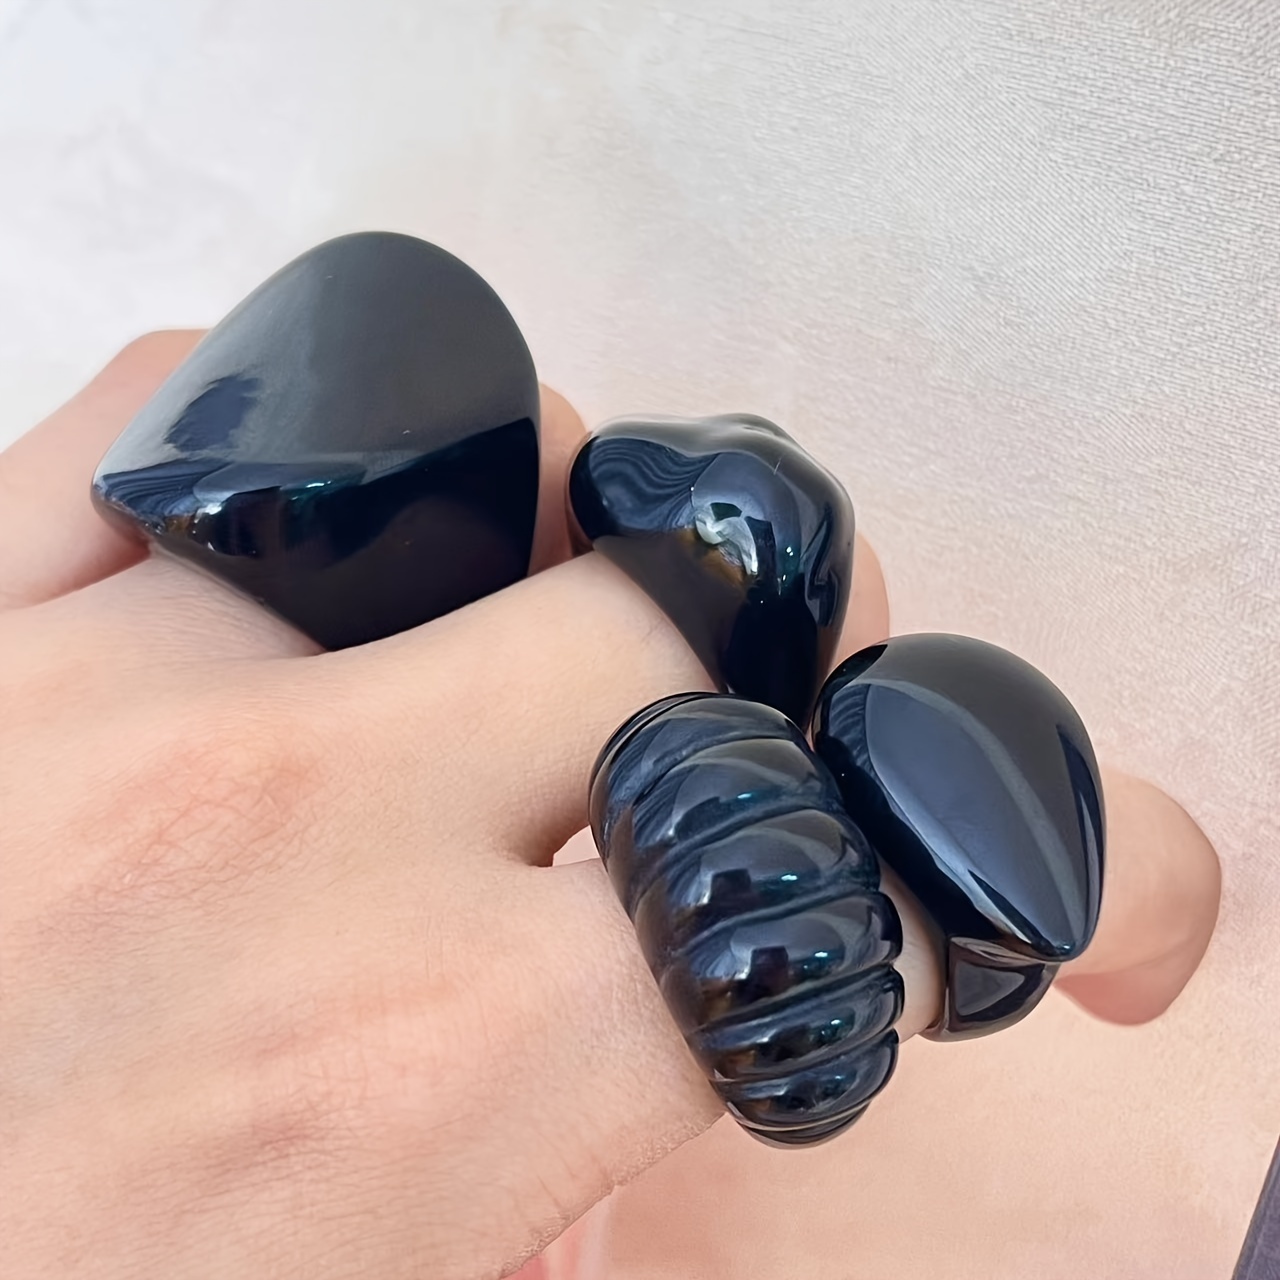 

Vintage Elegant Black Resin Ring Set For Men And Women - 4-piece Statement Fashion Jewelry, No Plating - Versatile Daily Wear, Ideal For Gift-giving